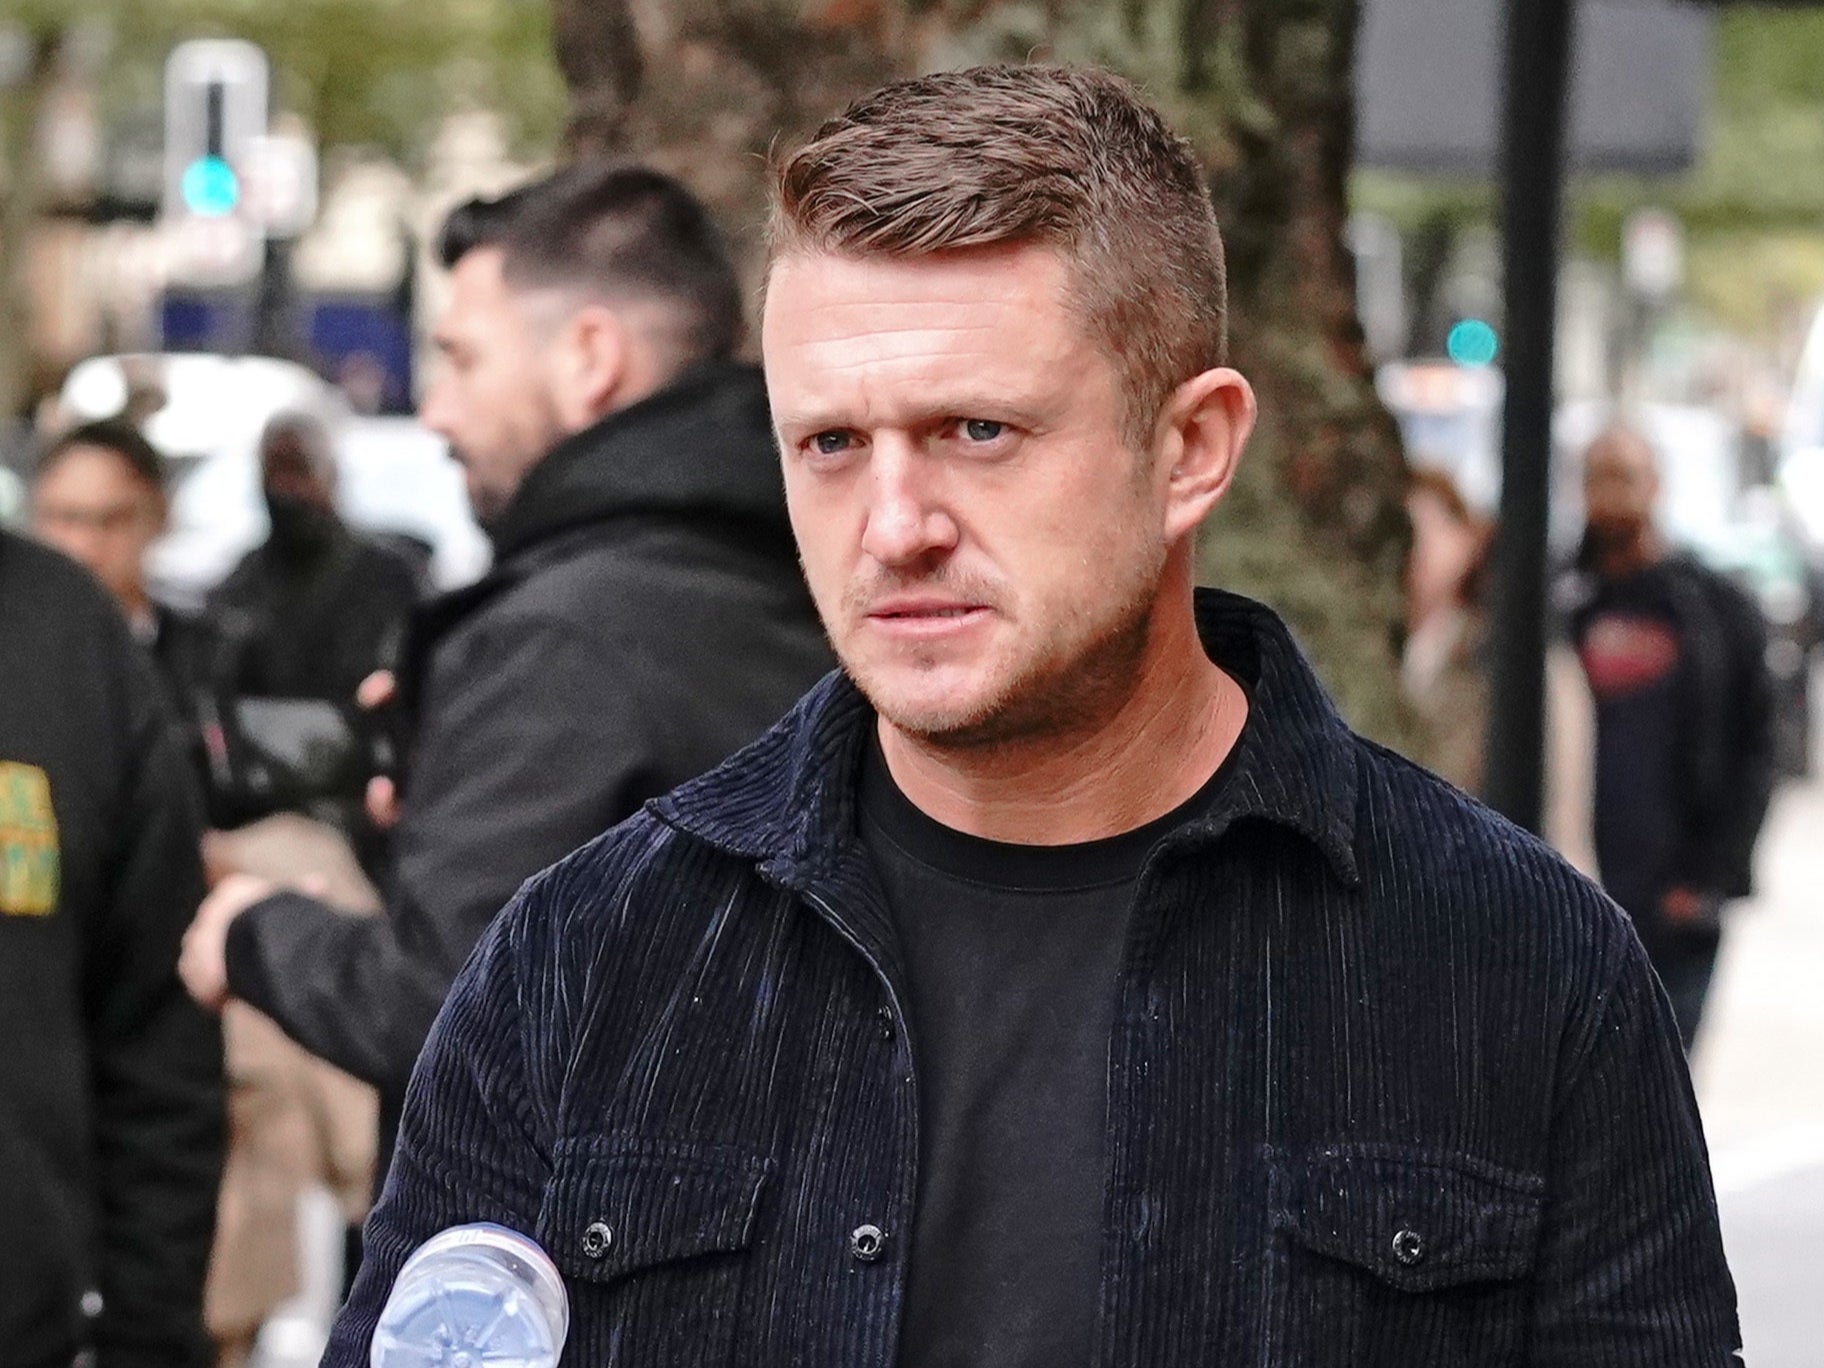 Tommy Robinson has been handed a five-year stalking ban after turning up at the home of an Independent journalist